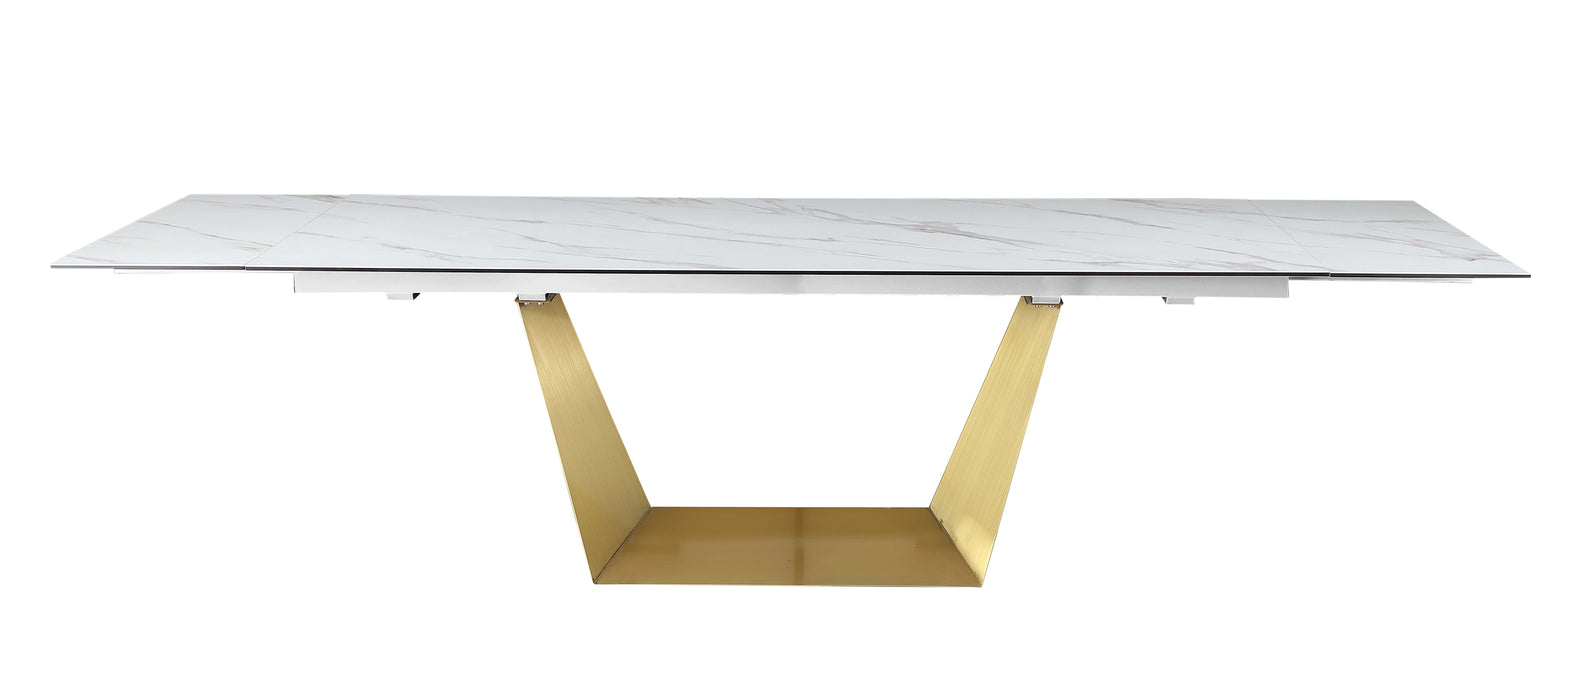 Contemporary Extendable Ceramic Top Dining Table w/ Golden Base SCARLETTE-DT